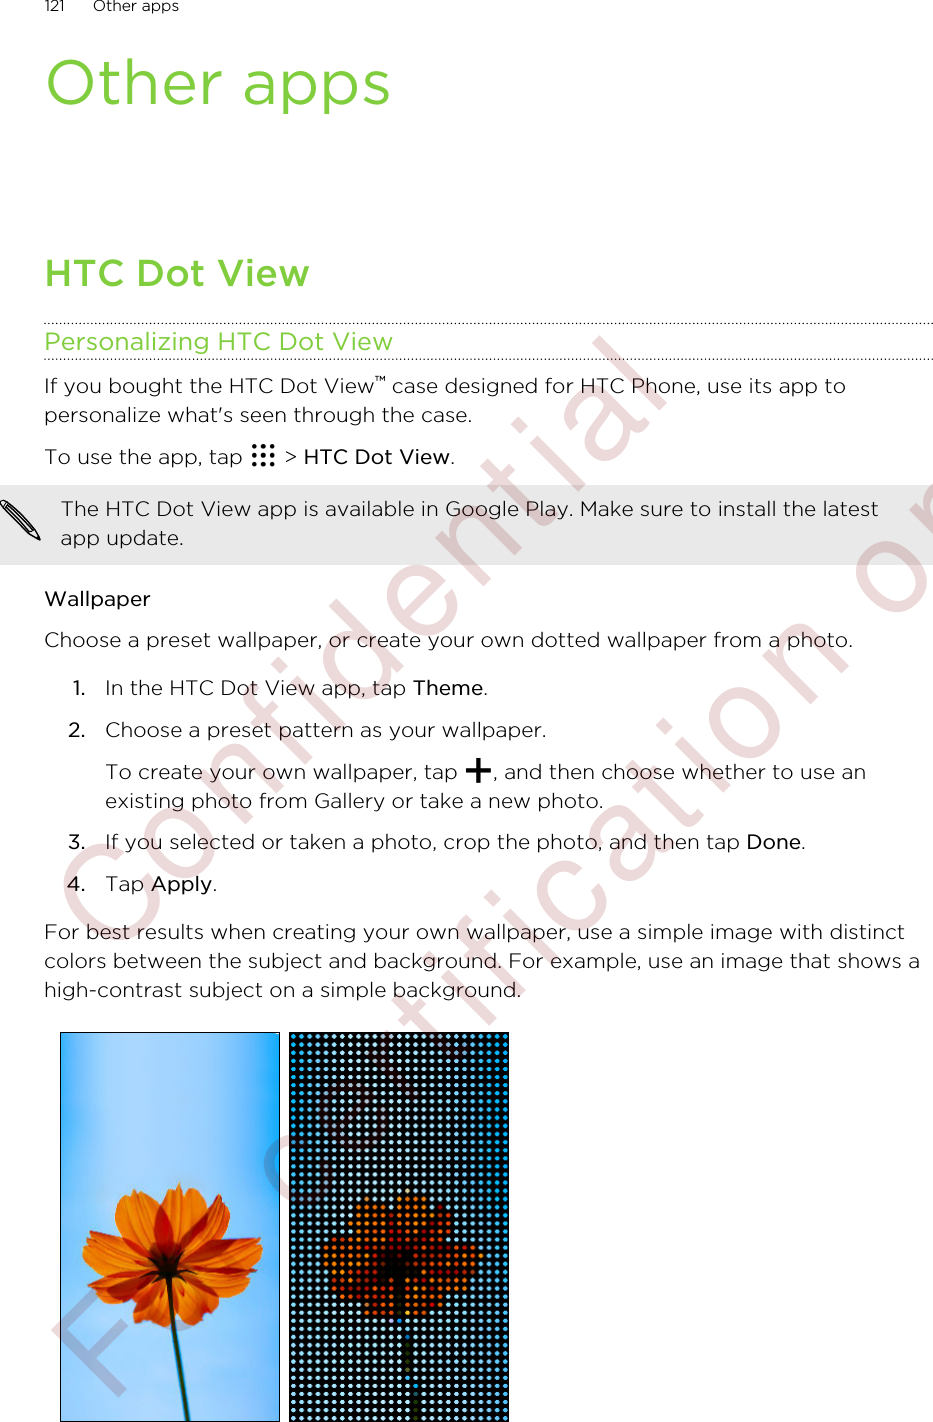 Other appsHTC Dot ViewPersonalizing HTC Dot ViewIf you bought the HTC Dot View™ case designed for HTC Phone, use its app topersonalize what&apos;s seen through the case.To use the app, tap   &gt; HTC Dot View.The HTC Dot View app is available in Google Play. Make sure to install the latestapp update.WallpaperChoose a preset wallpaper, or create your own dotted wallpaper from a photo.1. In the HTC Dot View app, tap Theme.2. Choose a preset pattern as your wallpaper. To create your own wallpaper, tap  , and then choose whether to use anexisting photo from Gallery or take a new photo.3. If you selected or taken a photo, crop the photo, and then tap Done.4. Tap Apply.For best results when creating your own wallpaper, use a simple image with distinctcolors between the subject and background. For example, use an image that shows ahigh-contrast subject on a simple background.121 Other apps        Confidential  For certification only